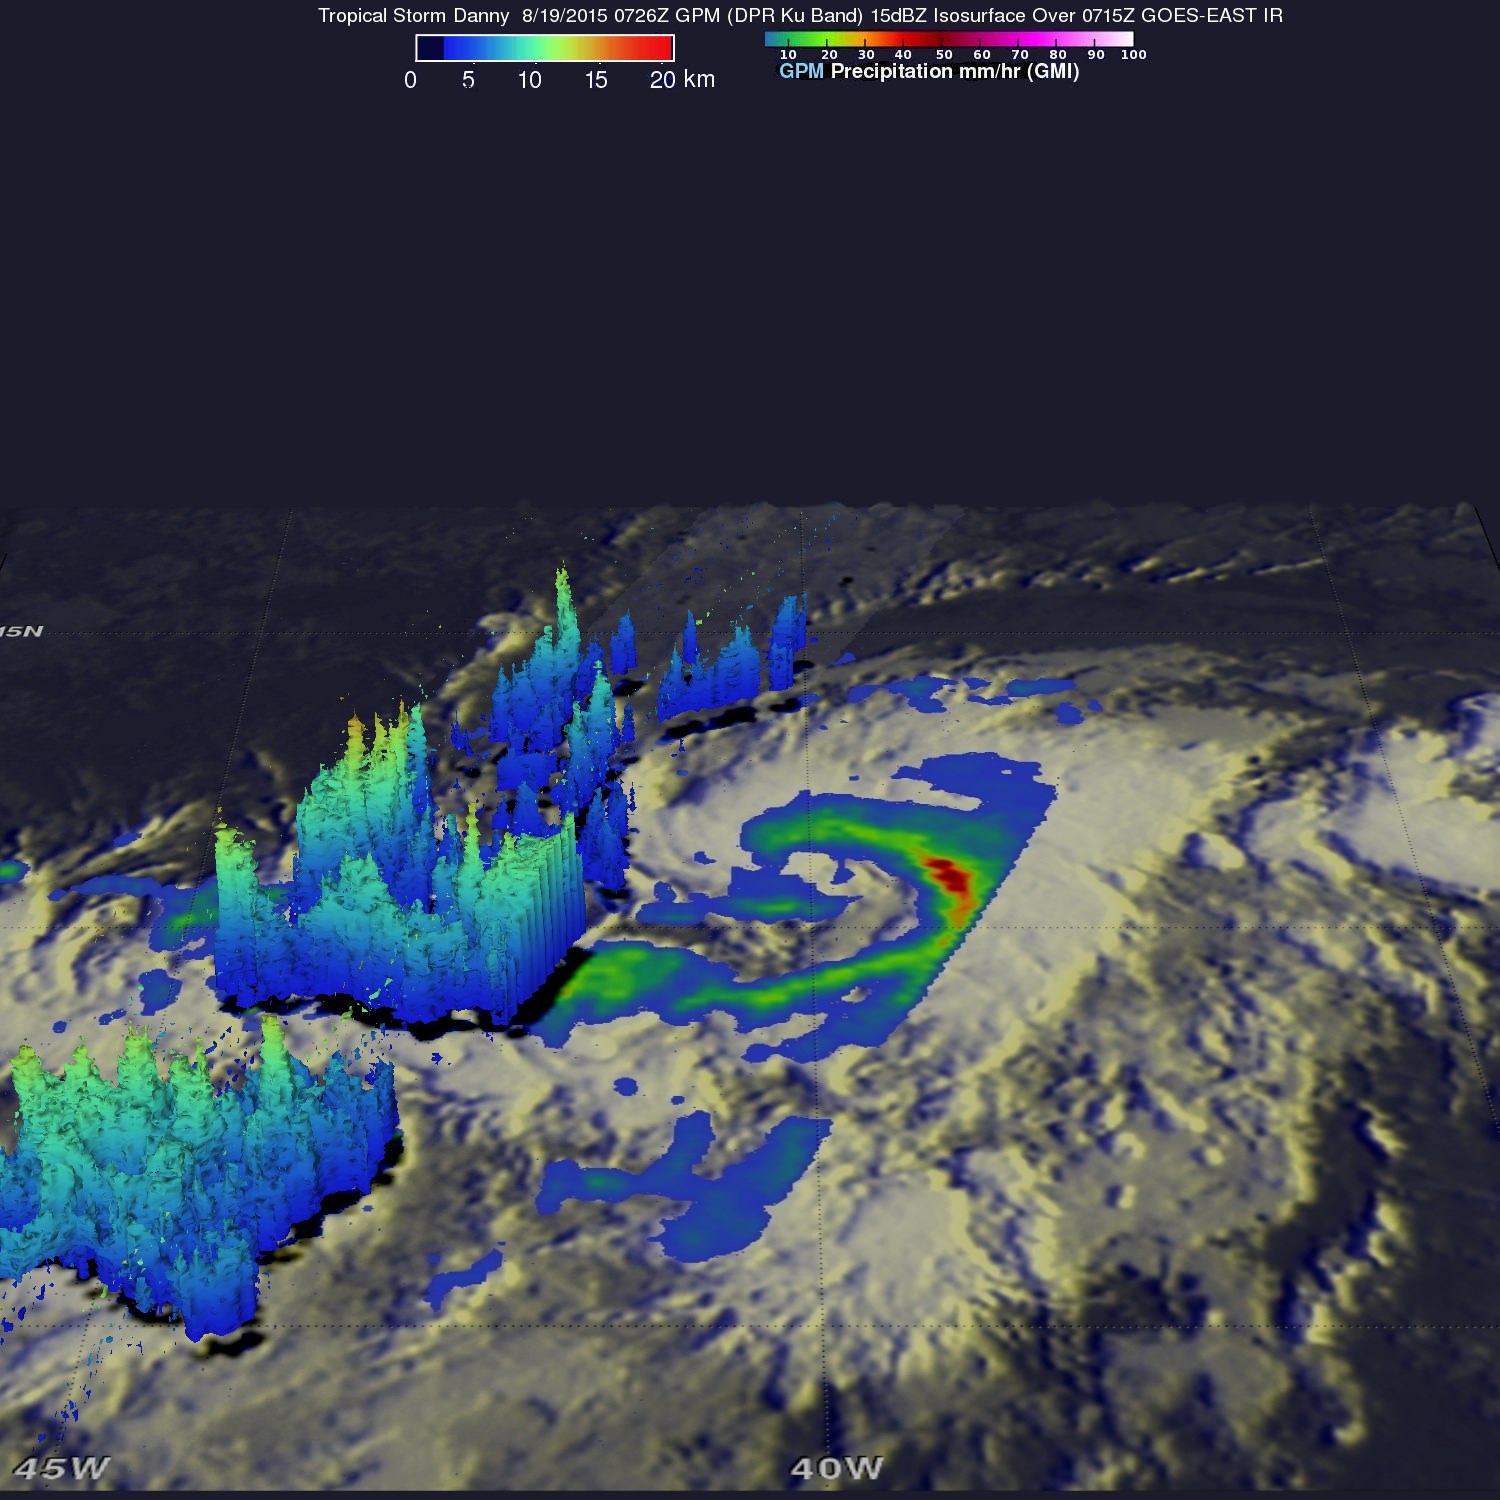 On Aug. 19, 2015 GPM saw Danny's rain structure was still asymmetric as noted by the large rain band (identified by the green arc indicating moderate rain) being located mainly on the eastern side of the storm. Within this rain band, GPM detected rain rates of up to 73.9 mm/hour (shown in darker red).Credits: SSAI/NASA, Hal Pierce 